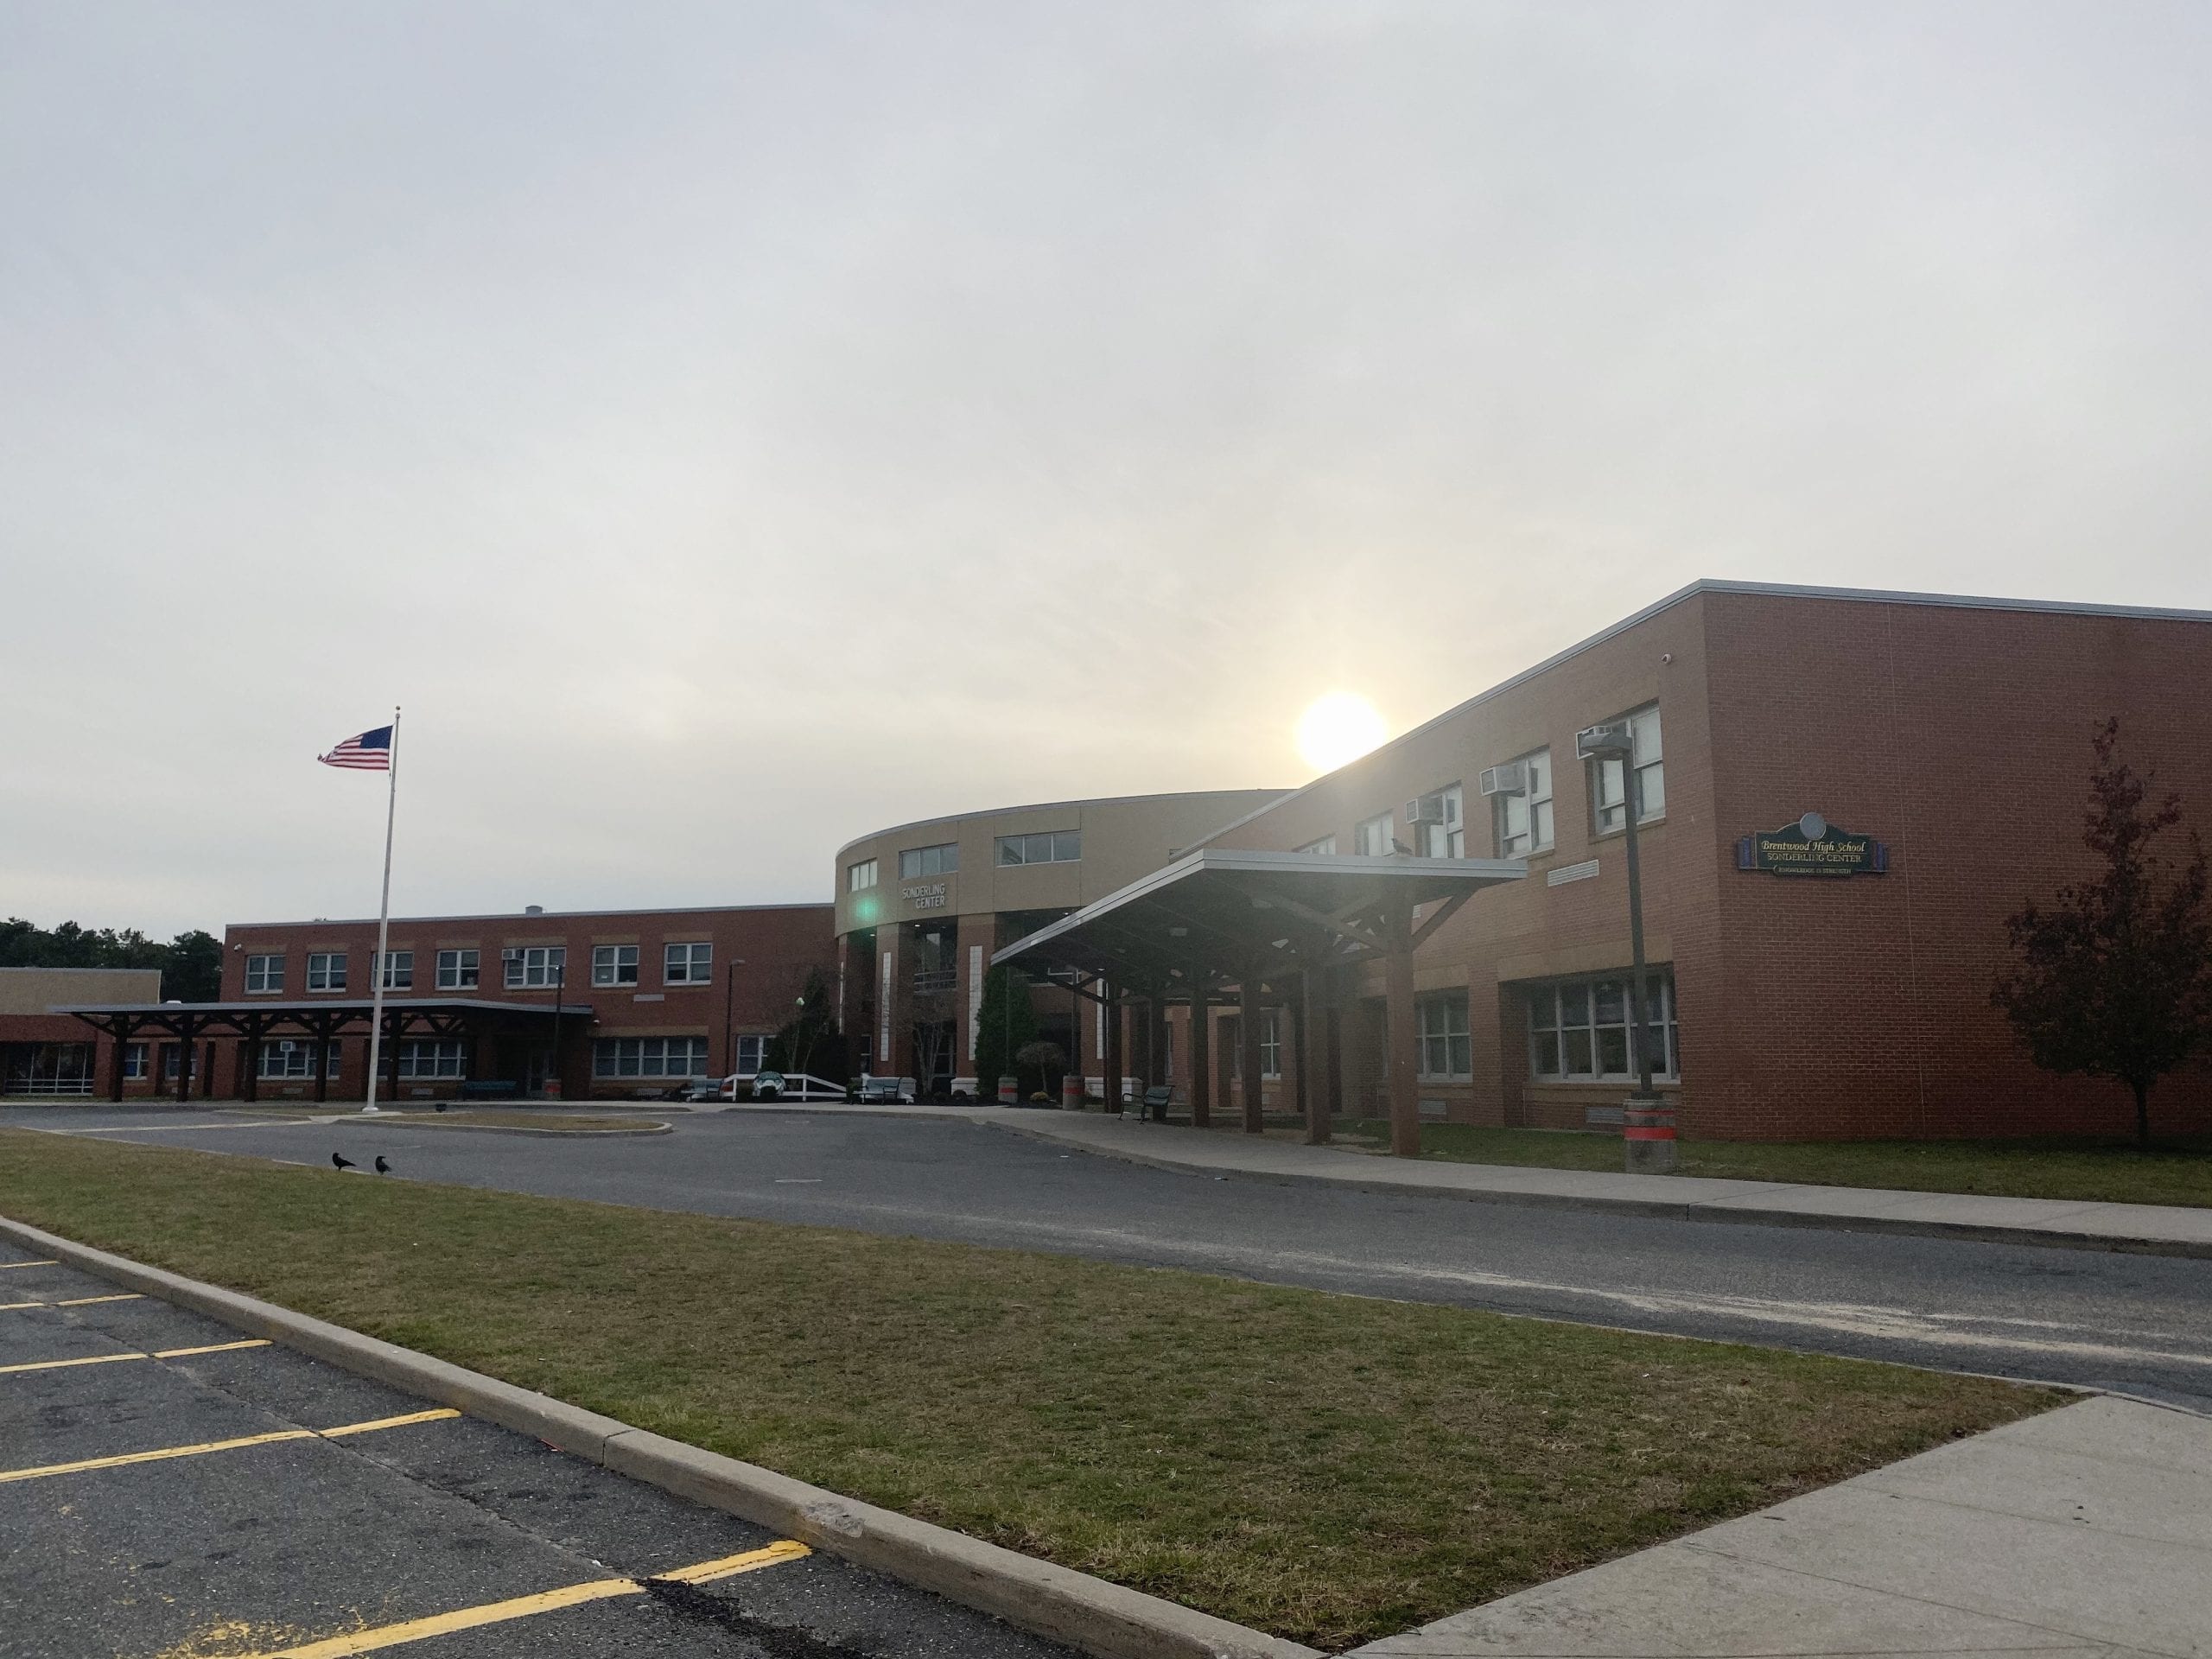 An image dated Nov. 2019, shows the outside of Brentwood High School in Brentwood, New York.